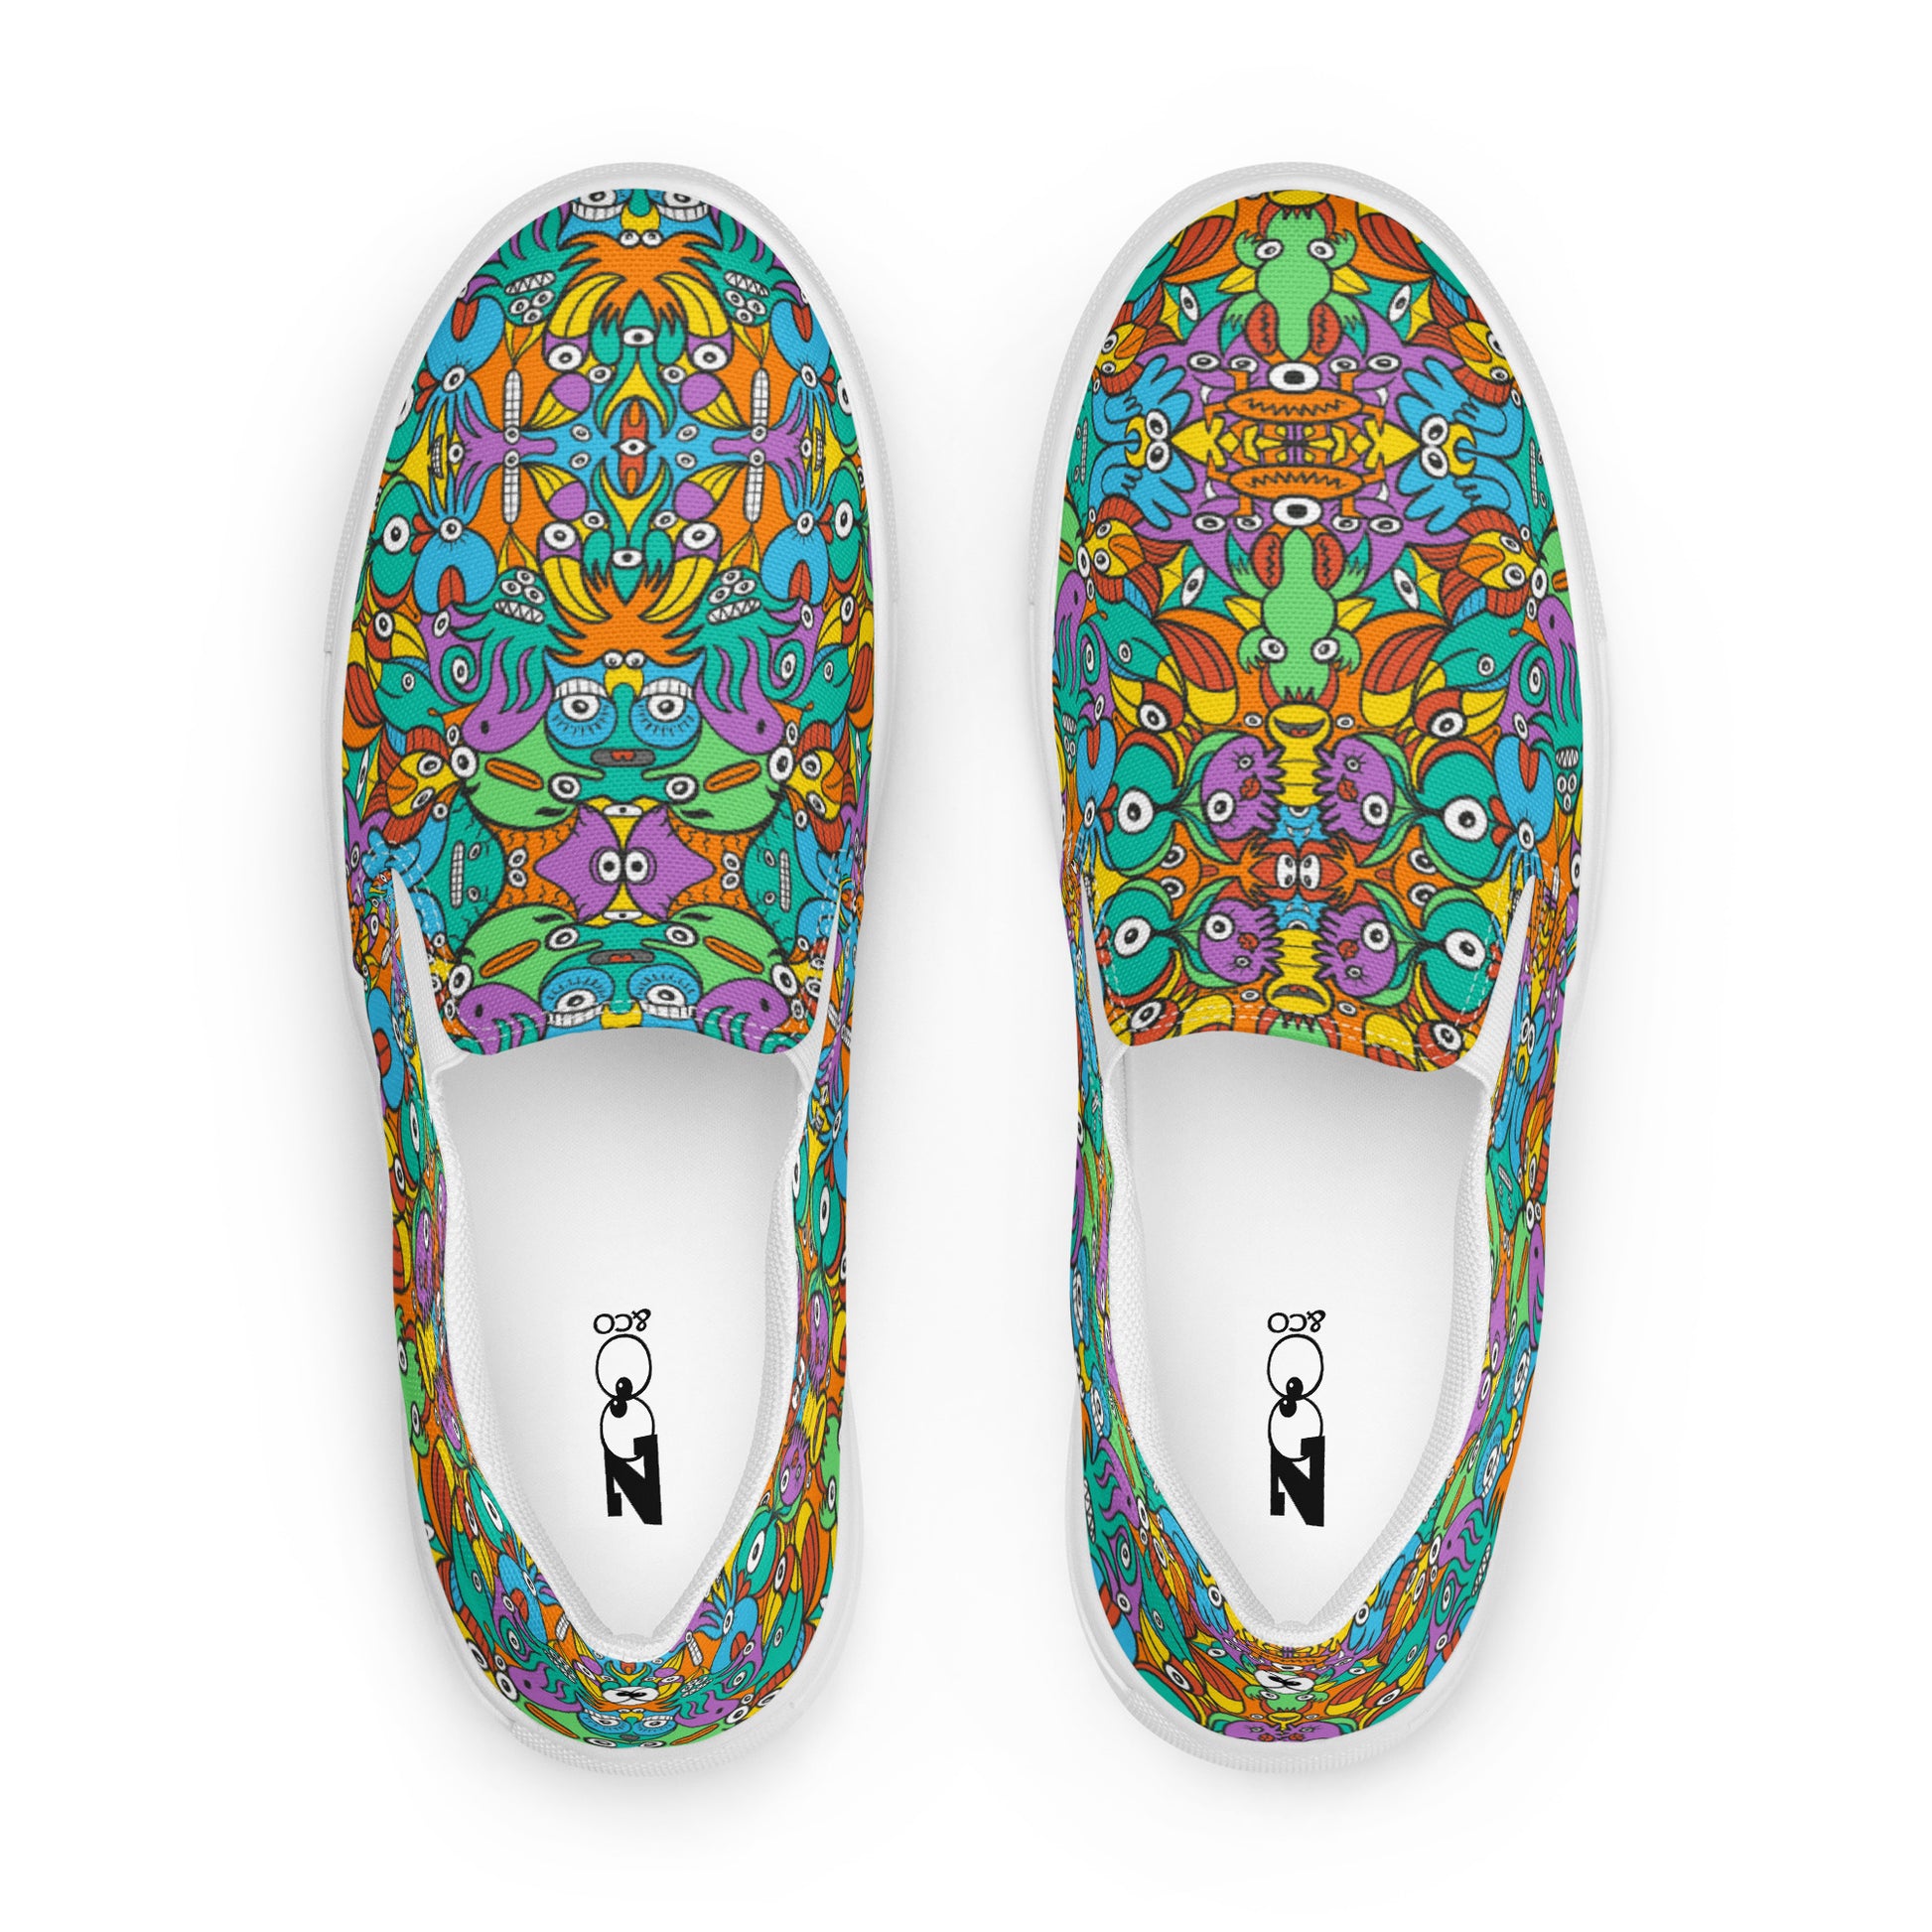 Fantastic doodle world full of weird creatures Women’s slip-on canvas shoes. Top view